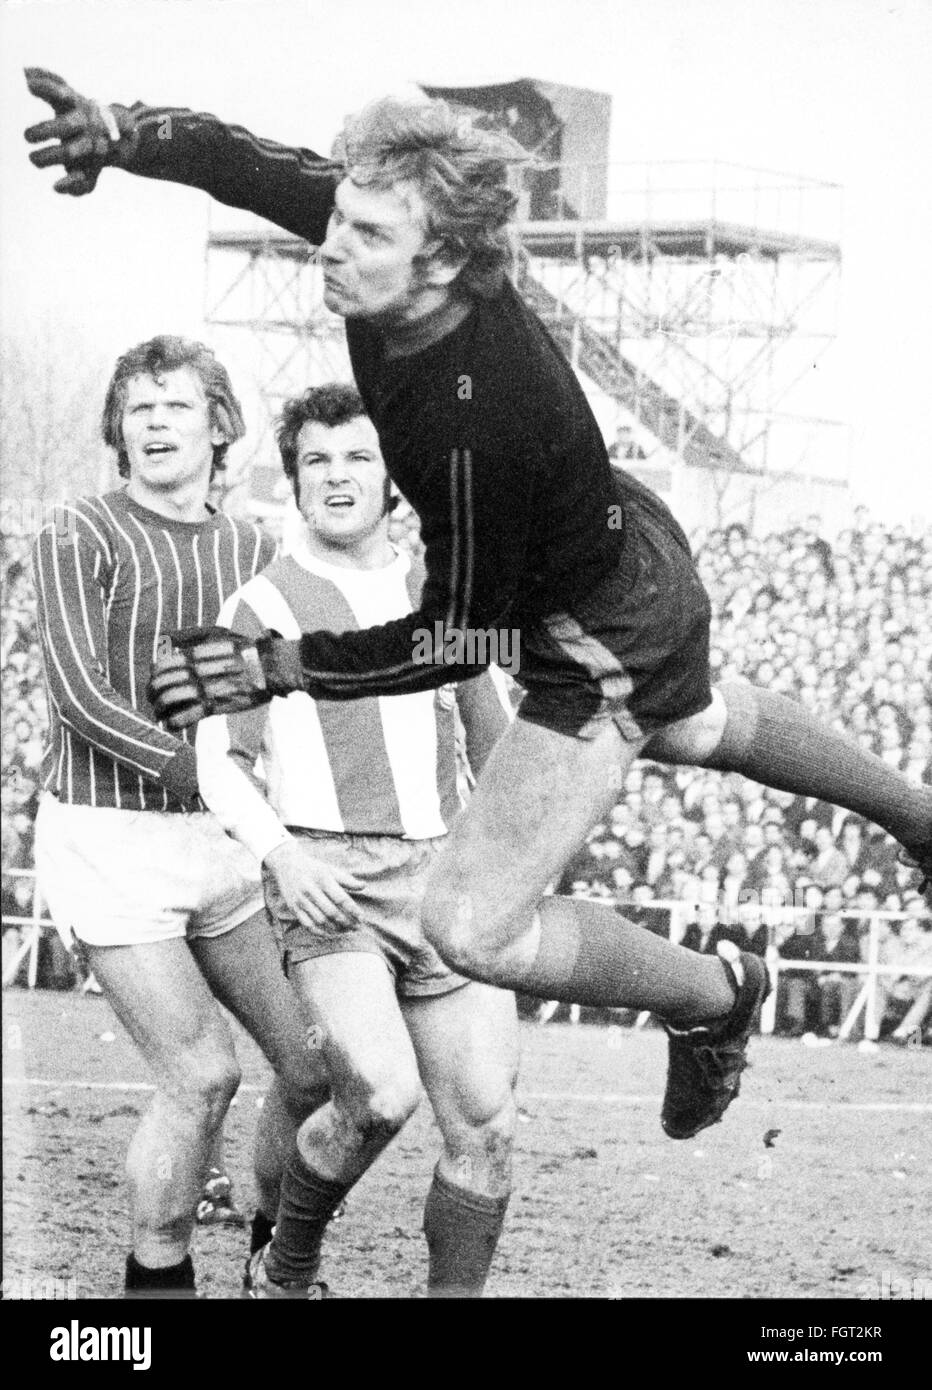 sports,football,games,Germany,DFB-Pokal,1970 / 1971,second round,game Fortuna Duesseldorf versus Wuppertaler SV(4:0),Flinger Broich,Duesseldorf,20.2.1971,save of the Wuppertal goal keeper Willi Janzik,behind Reiner Geye and Emil Meisen,DFB cup,football match,soccer match,football matches,footballer,footballers,kicker,football player,football players,action,act,actions,acts,jumping,jumps,jump,West Germany,Western Germany,Germany,1970s,70s,20th century,people,men,man,male,football,soccer,footballs,soccer balls,second ro,Additional-Rights-Clearences-Not Available Stock Photo